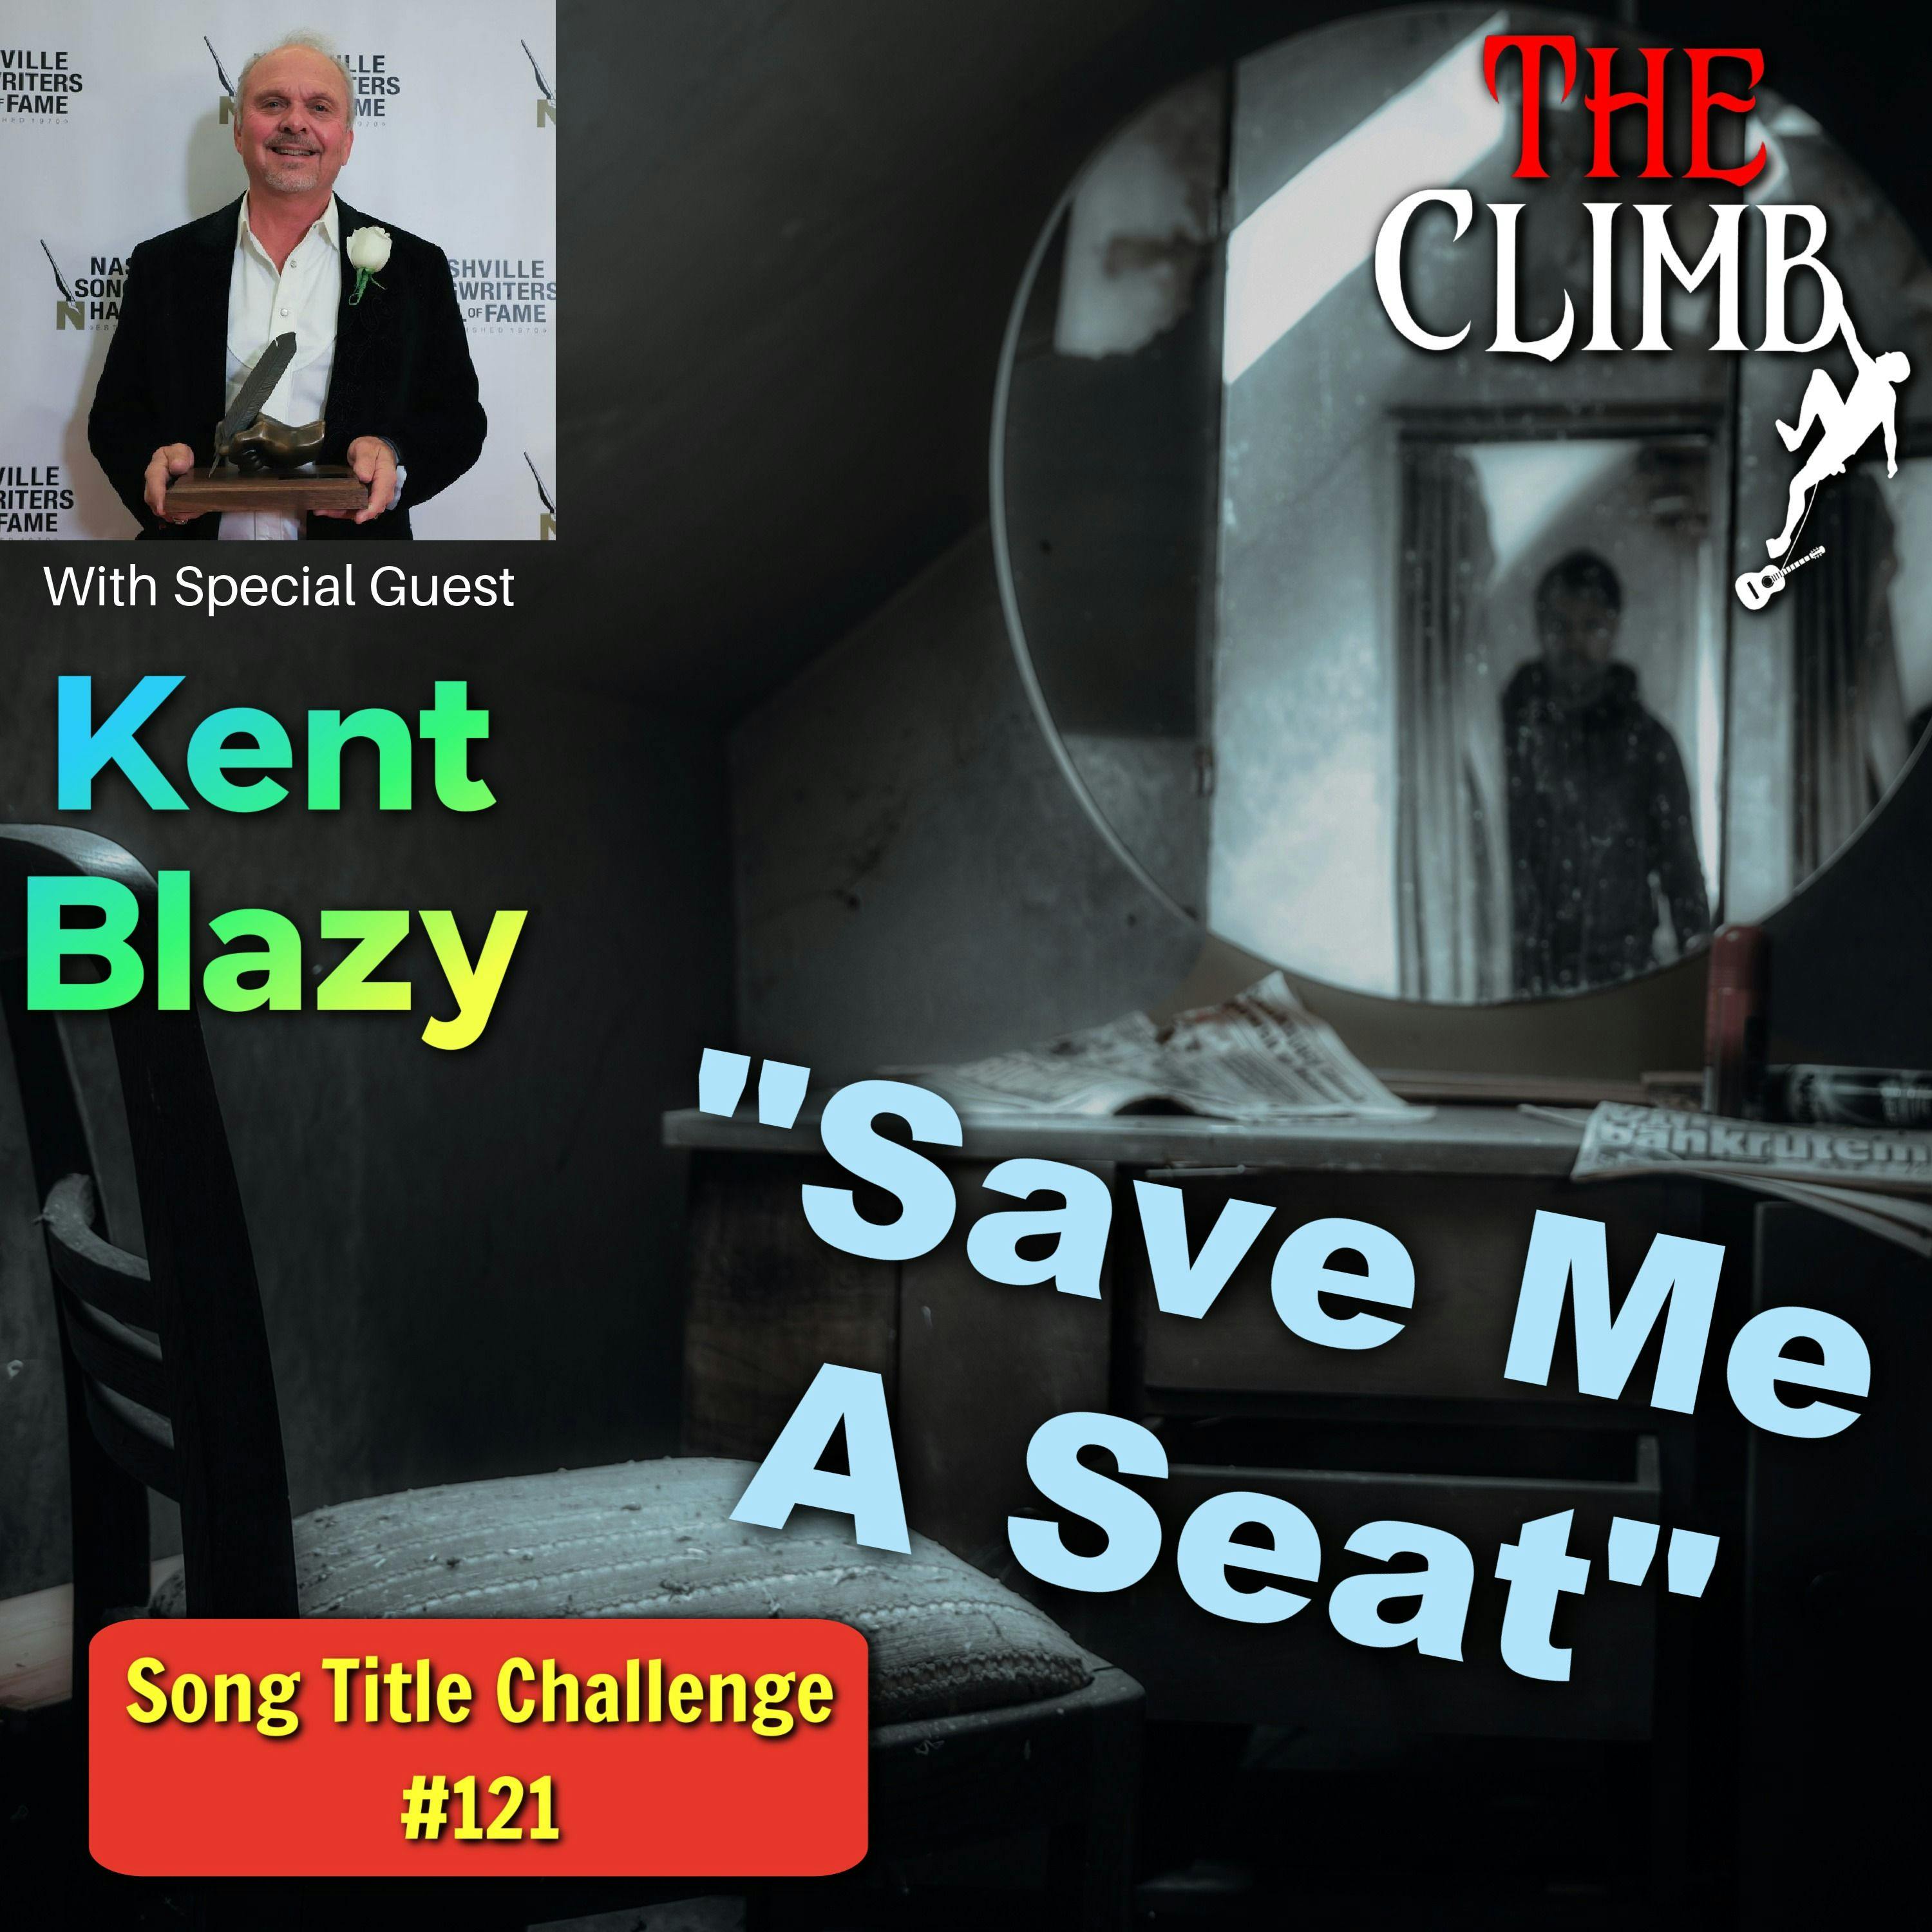 Song Title Challenge #121: ”Save Me A Seat” with Hit Songwriter, Kent Blazy